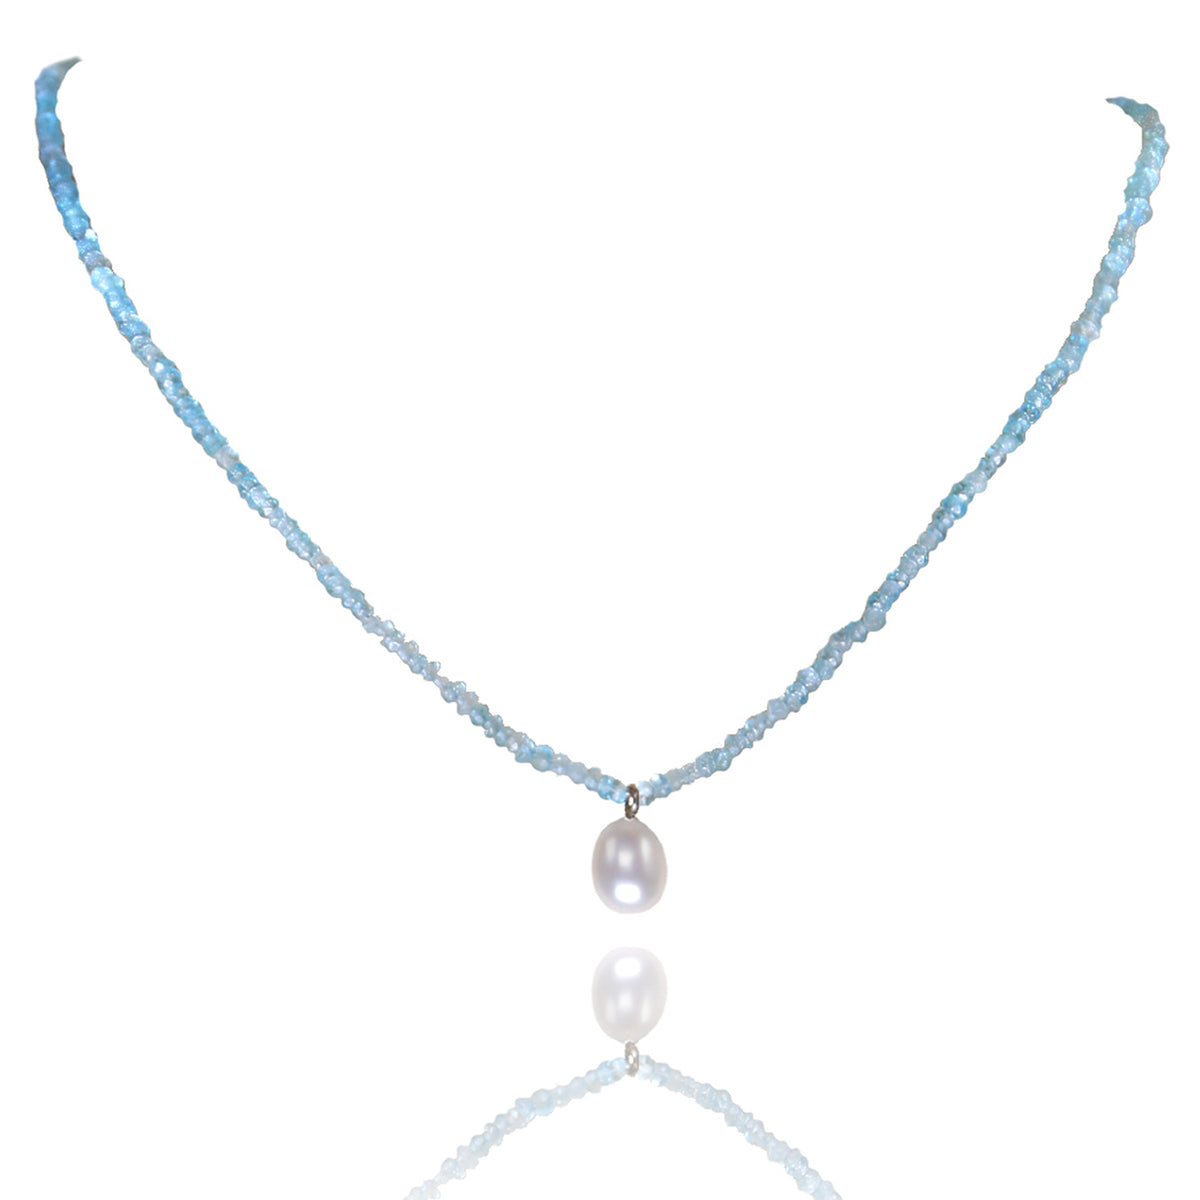 Apatite Necklace with White Freshwater Pearl Drop